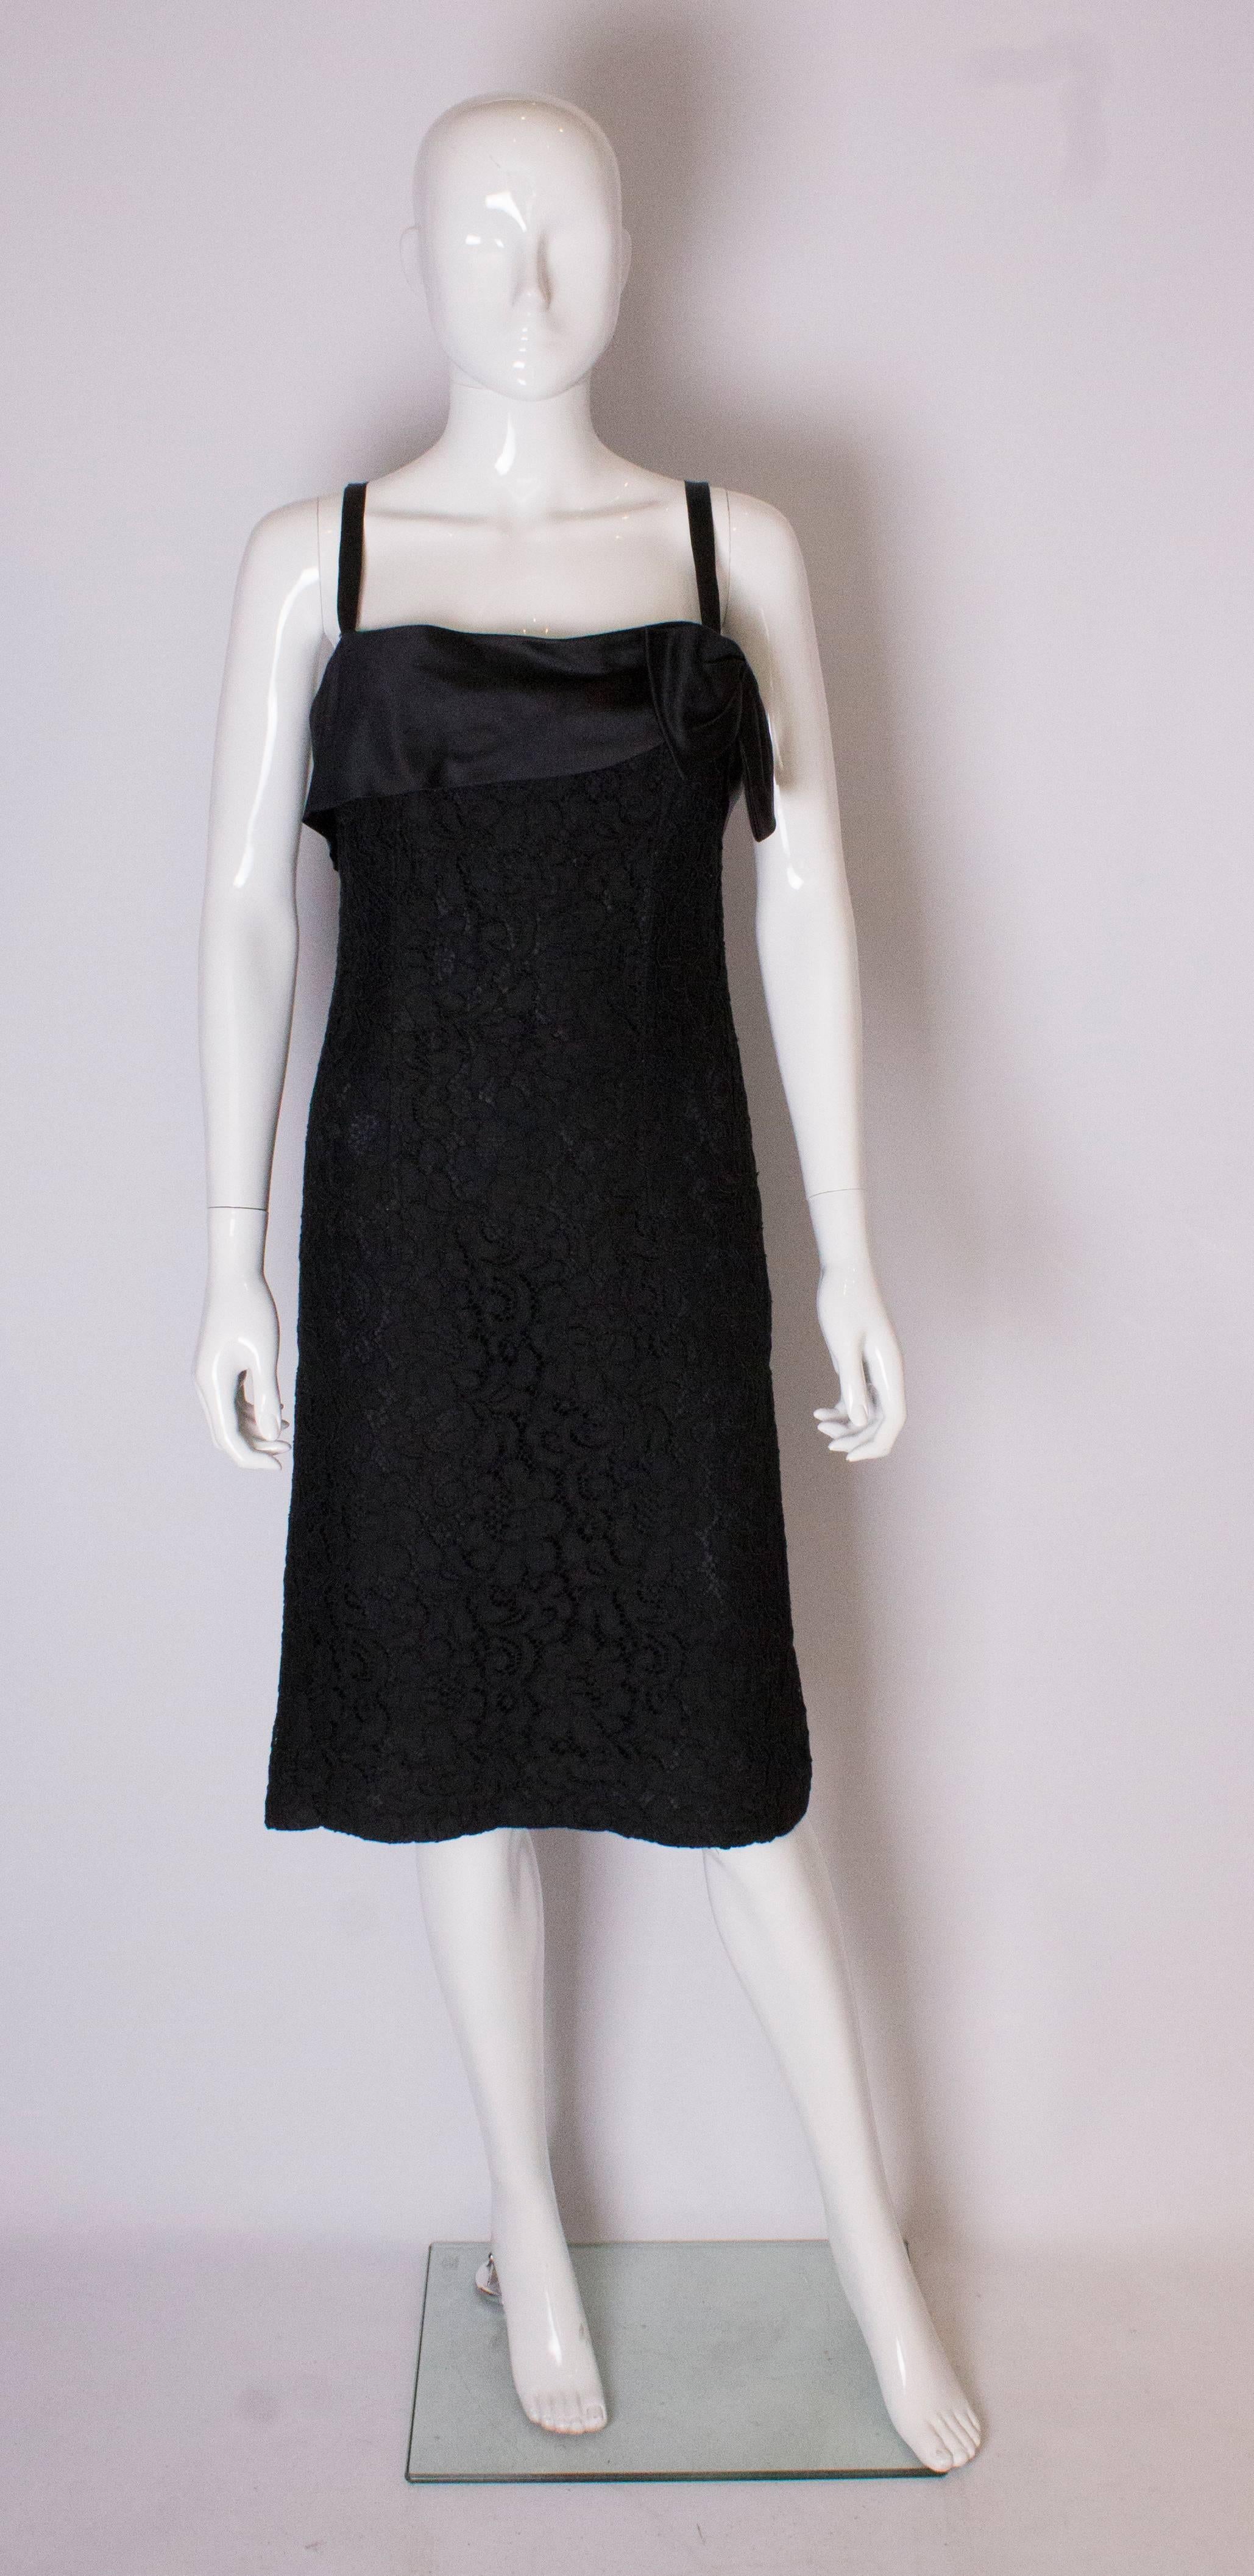 A chic  black lace dress. The body of the dress is black lace with a black lining underneath. There is a satin band and bow at bust leval ,ribbon straps and a central back zip.